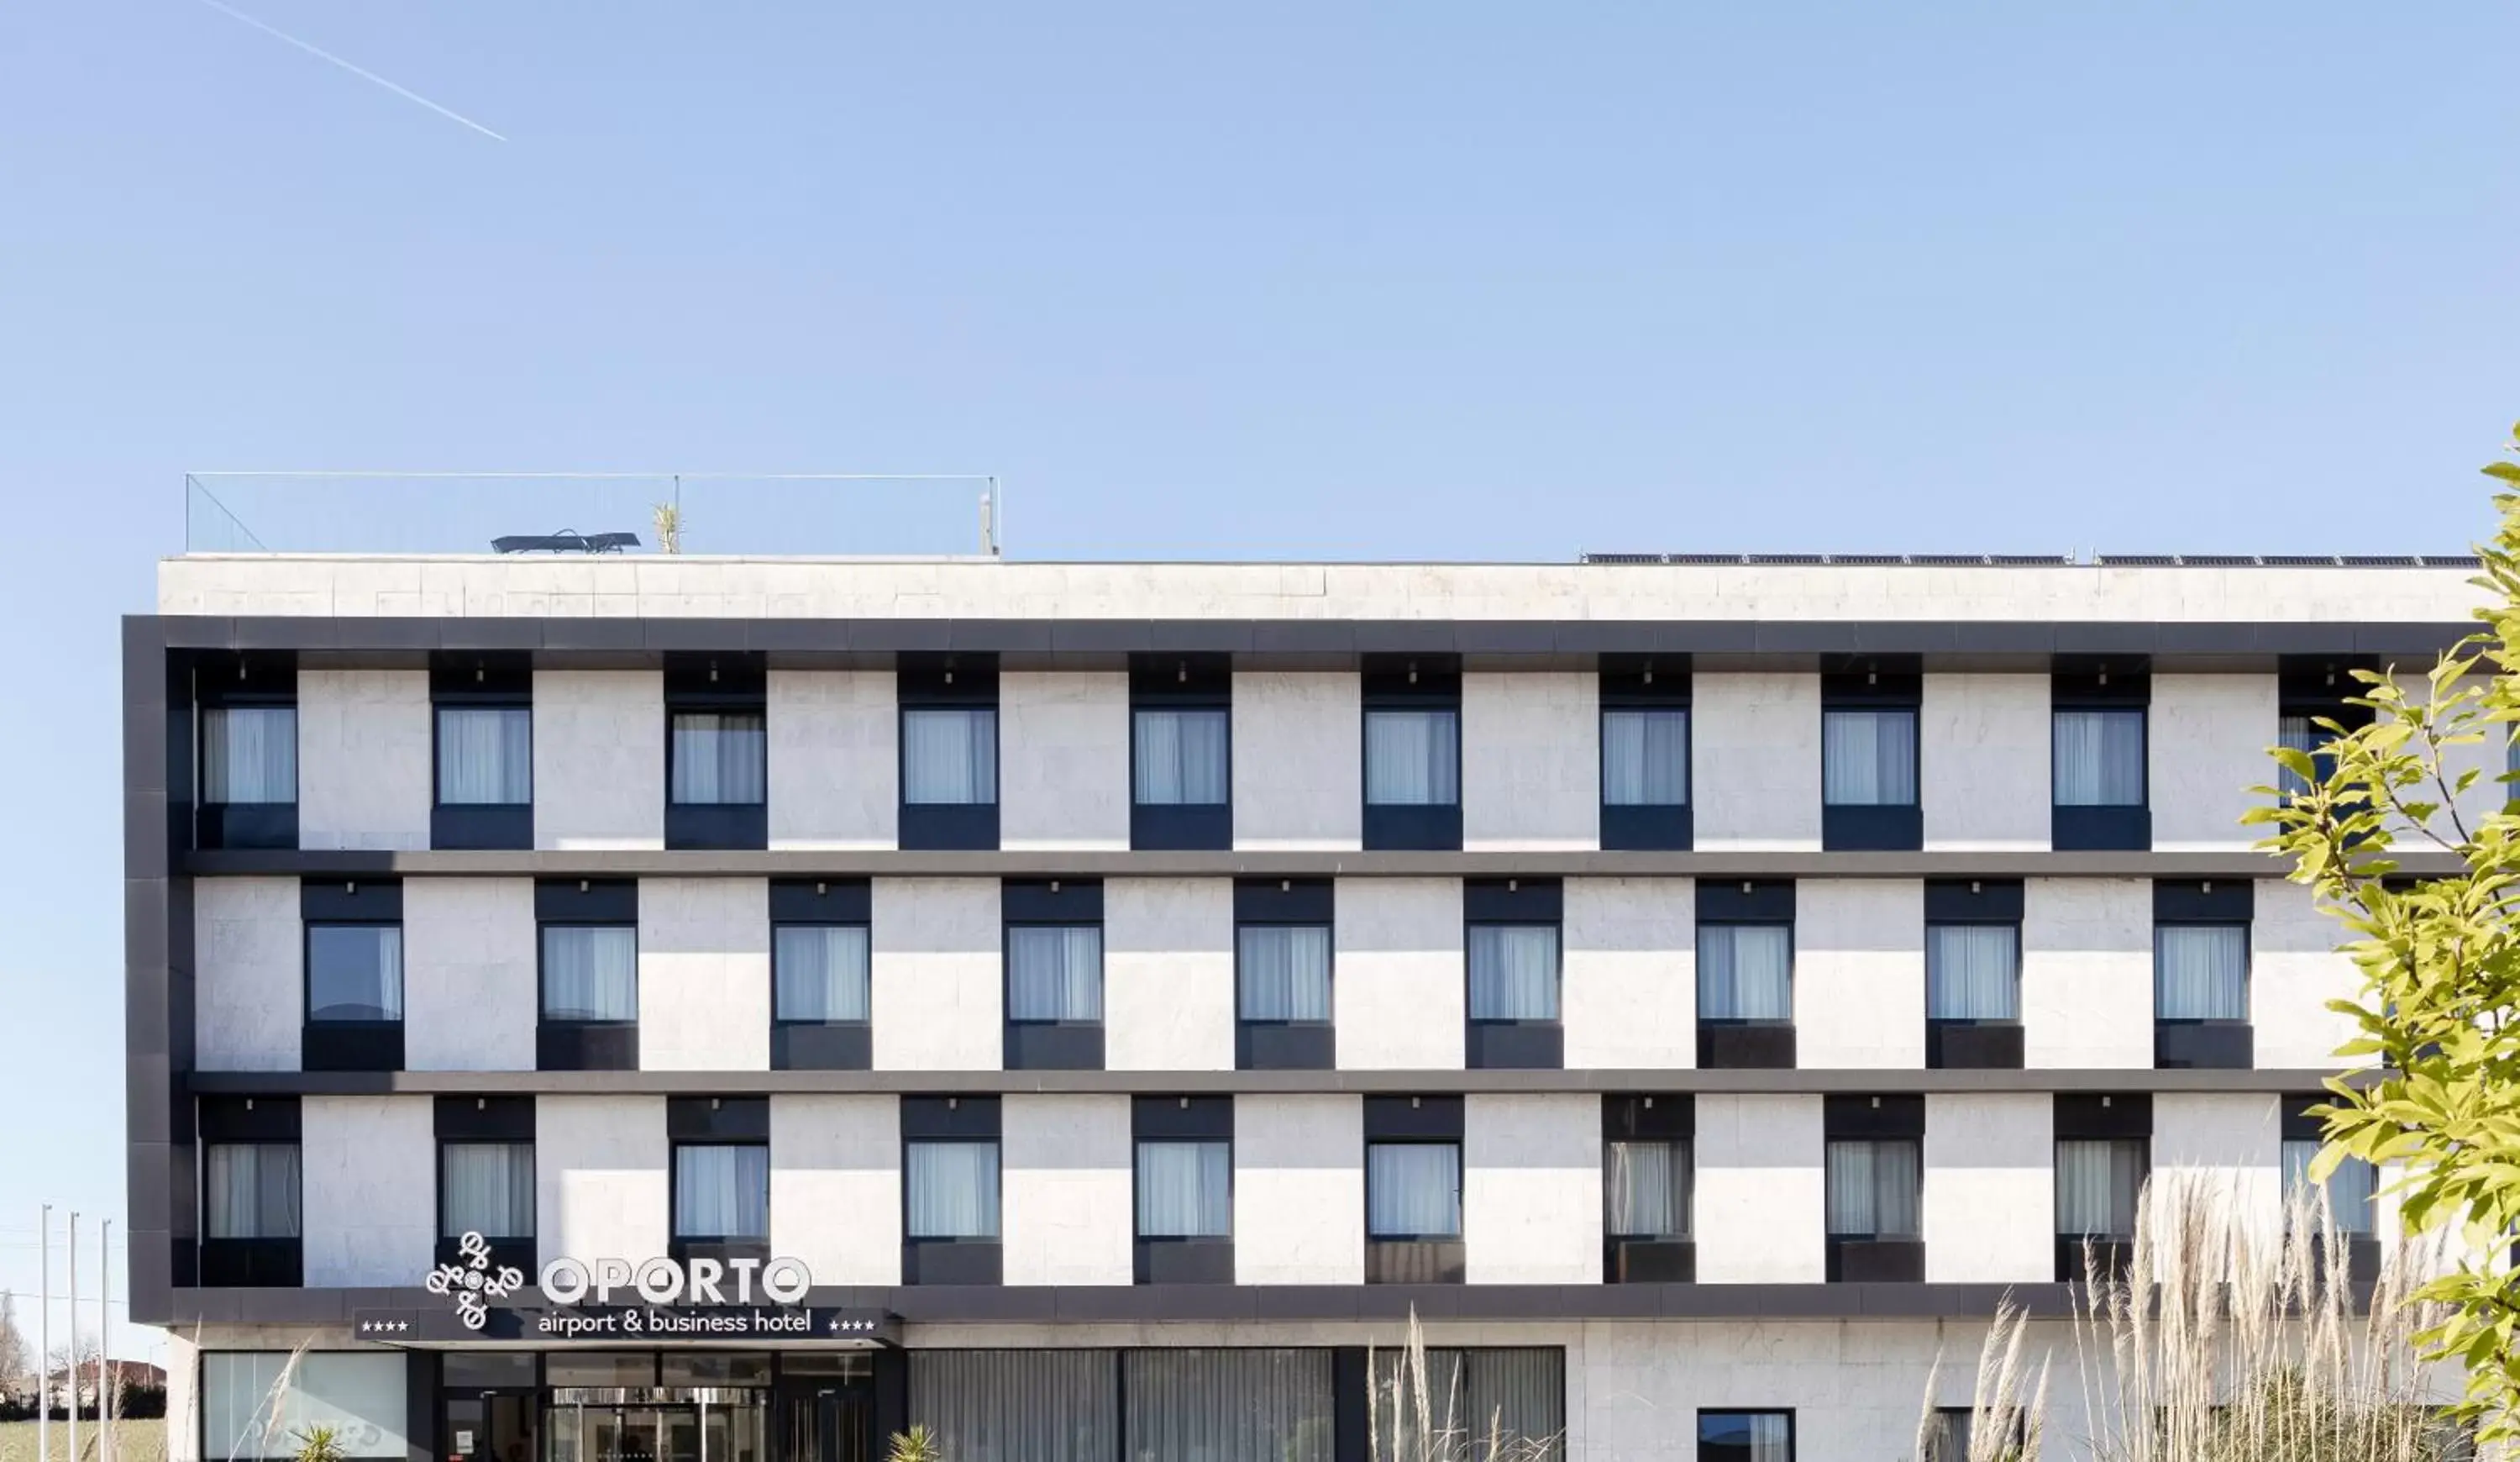 Property Building in Oporto Airport & Business Hotel